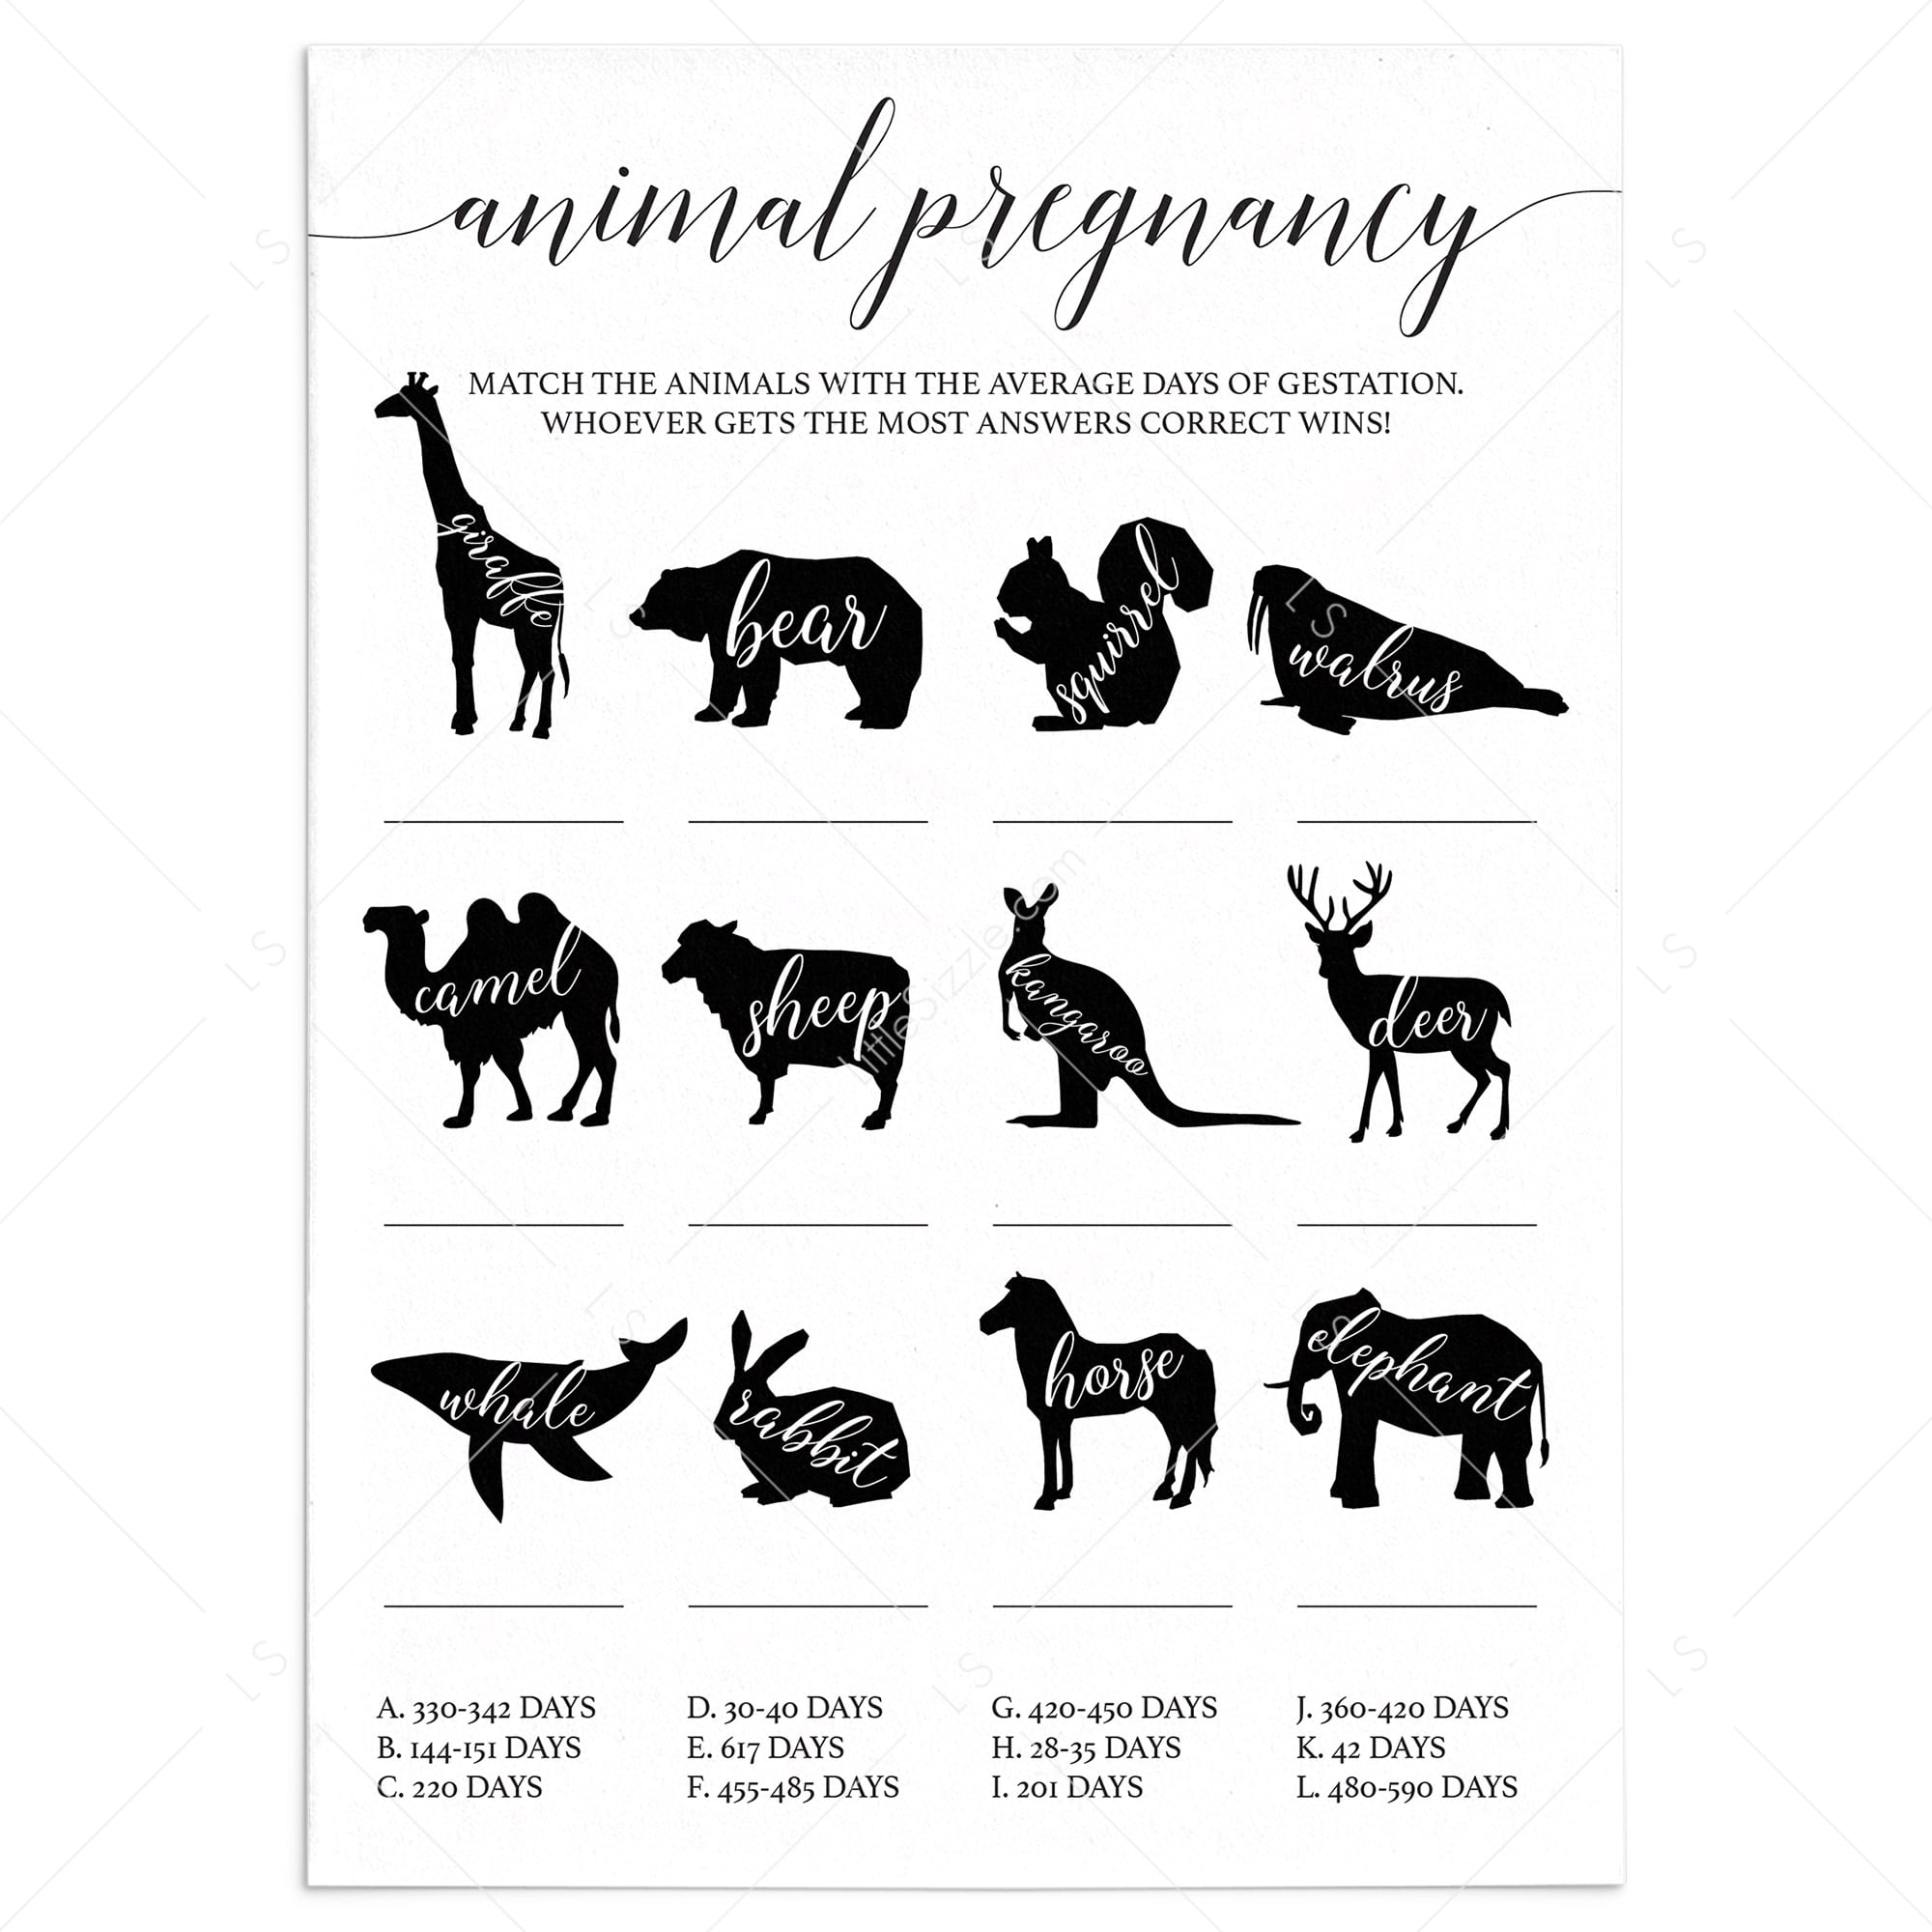 Animal pregnancy baby shower game download by LittleSizzle